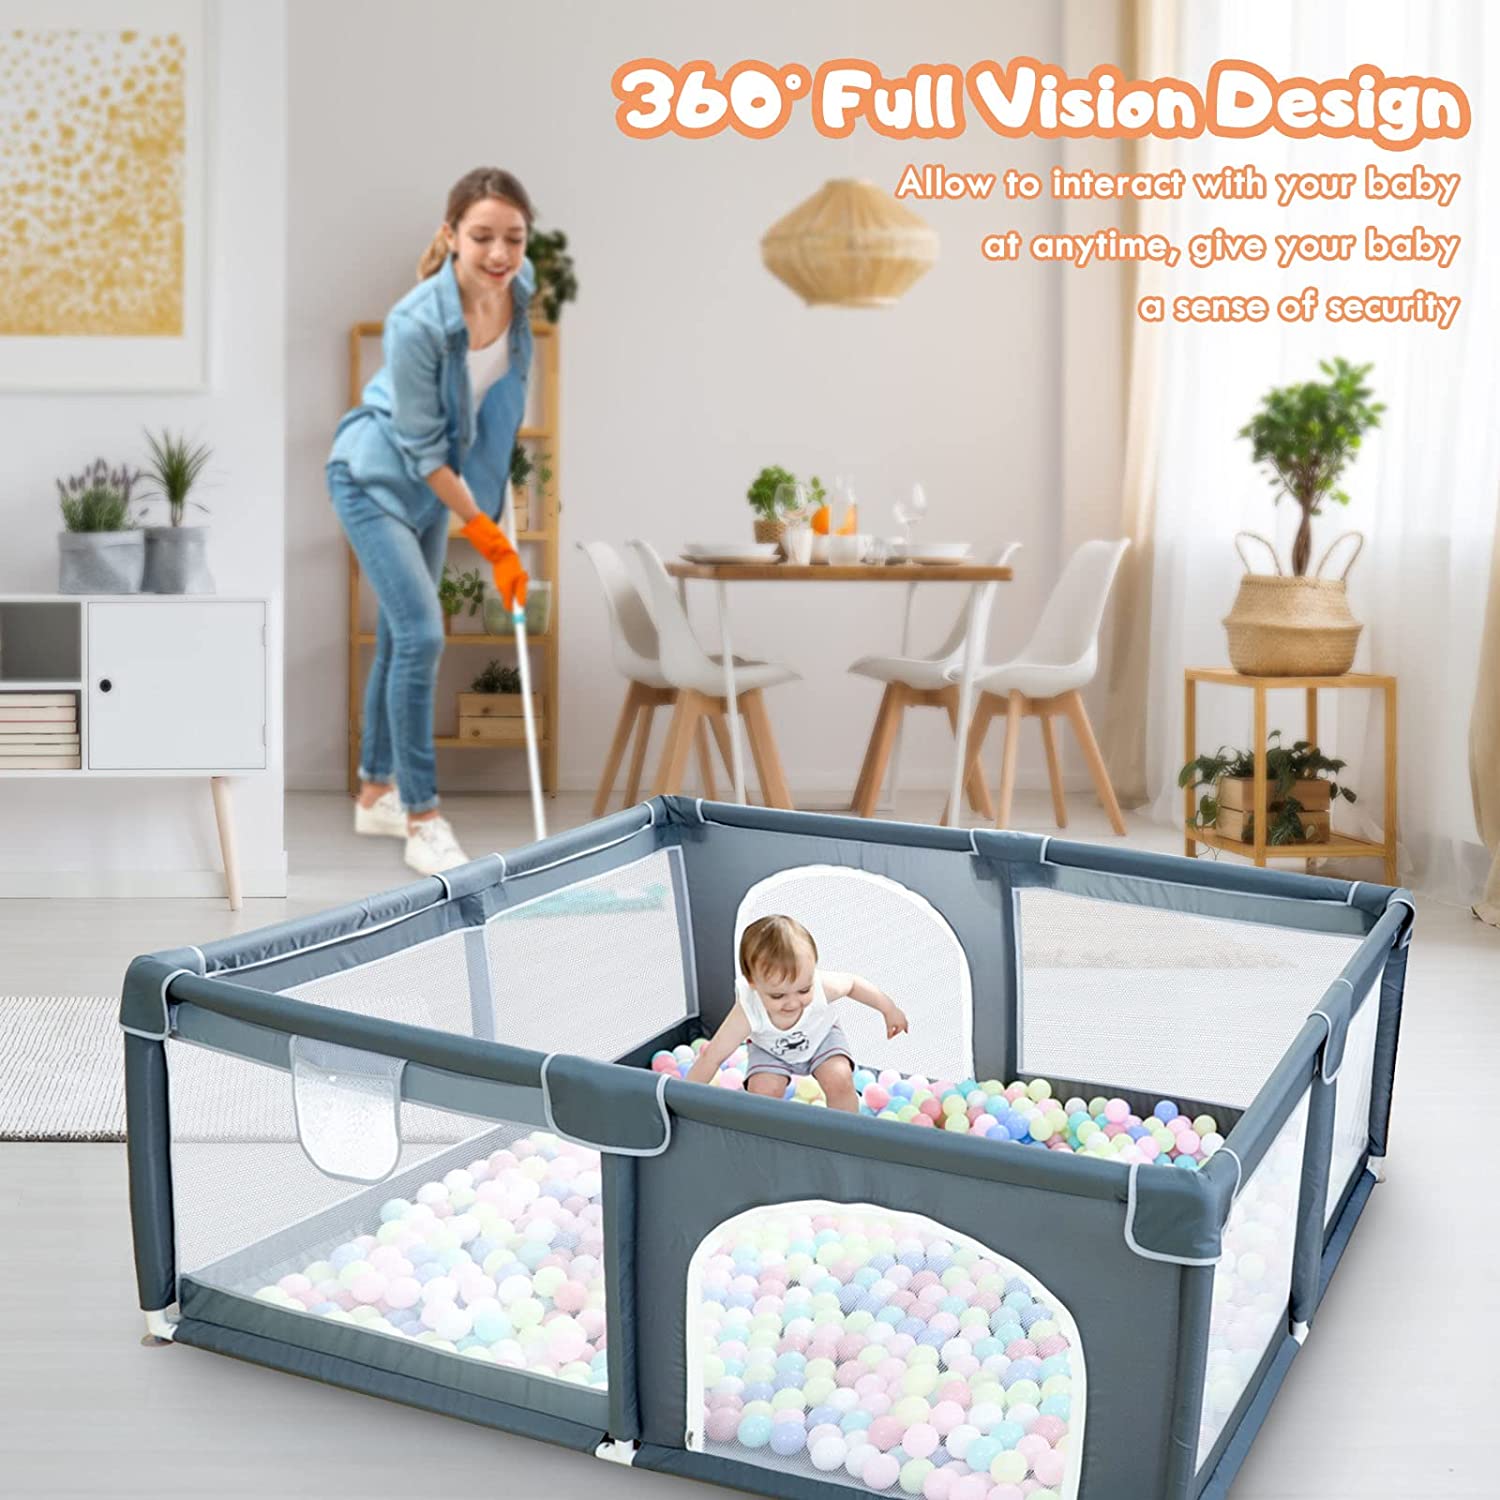 Large Baby Playpen79x71, Extra Large Play Pen For Babies And Toddlers, Play Yard With Gate, Baby Fence With Breathable Mesh, Safety Indoor & Outdoor Activity Center Grey - TryKid